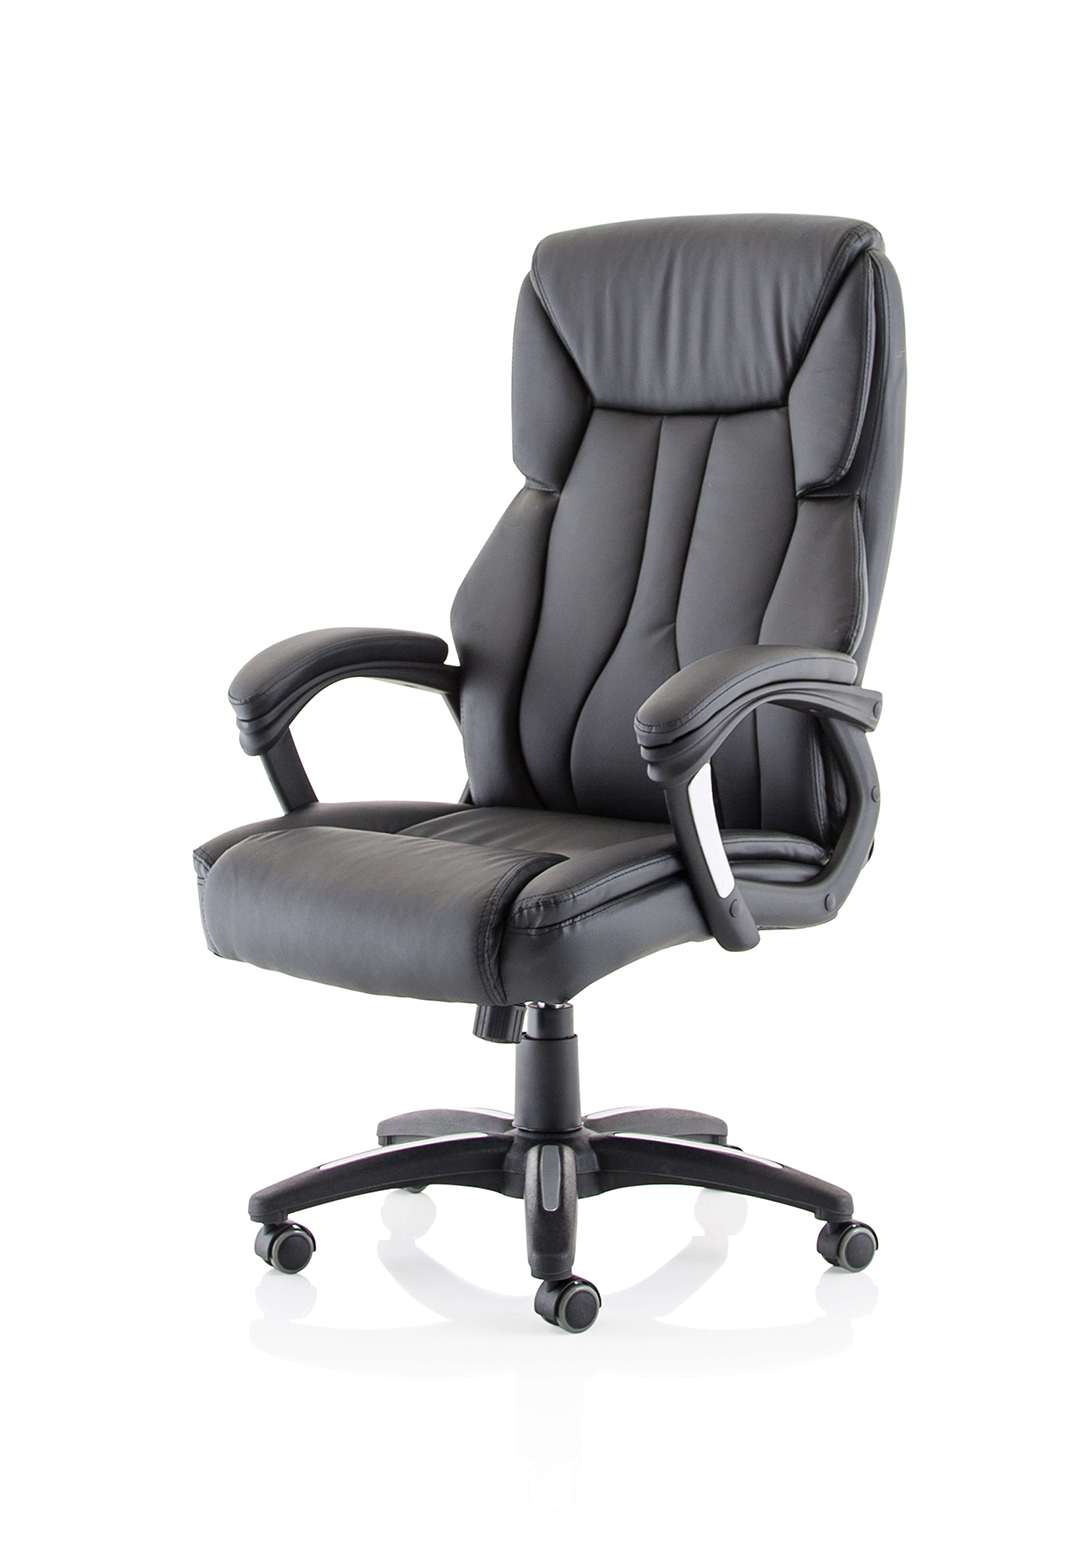 Stratford Exec Home Office Chair | Executive Chair | Home Office Furniture | Leather Home Office Chair | Leather Executive Chair | Swivel Chair | Swivel Executive Chair